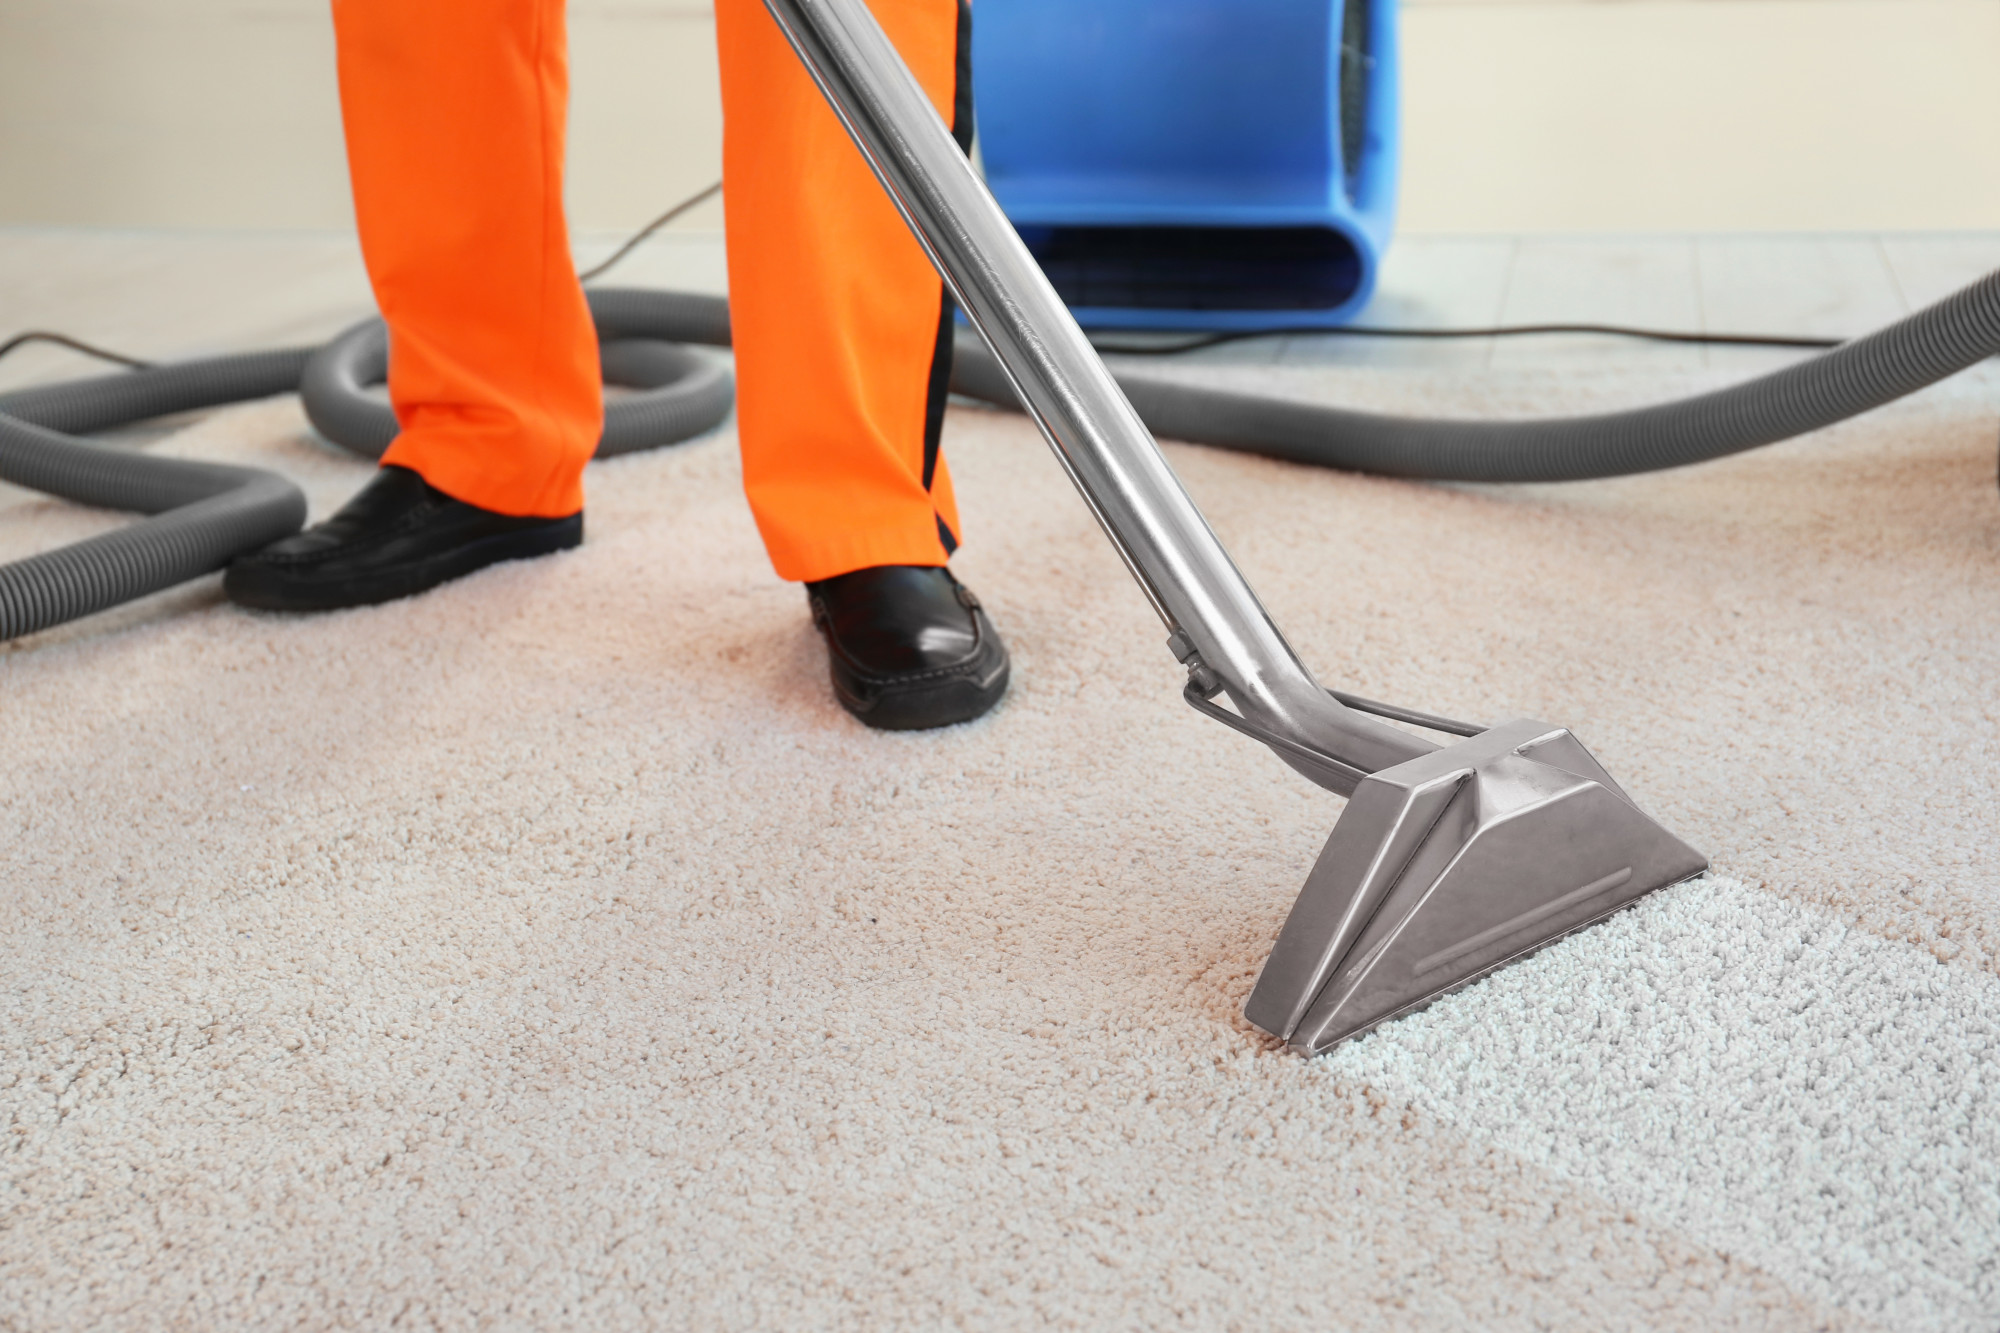 5 Carpet Protection Tips to Keep Your Carpets Looking Fresh